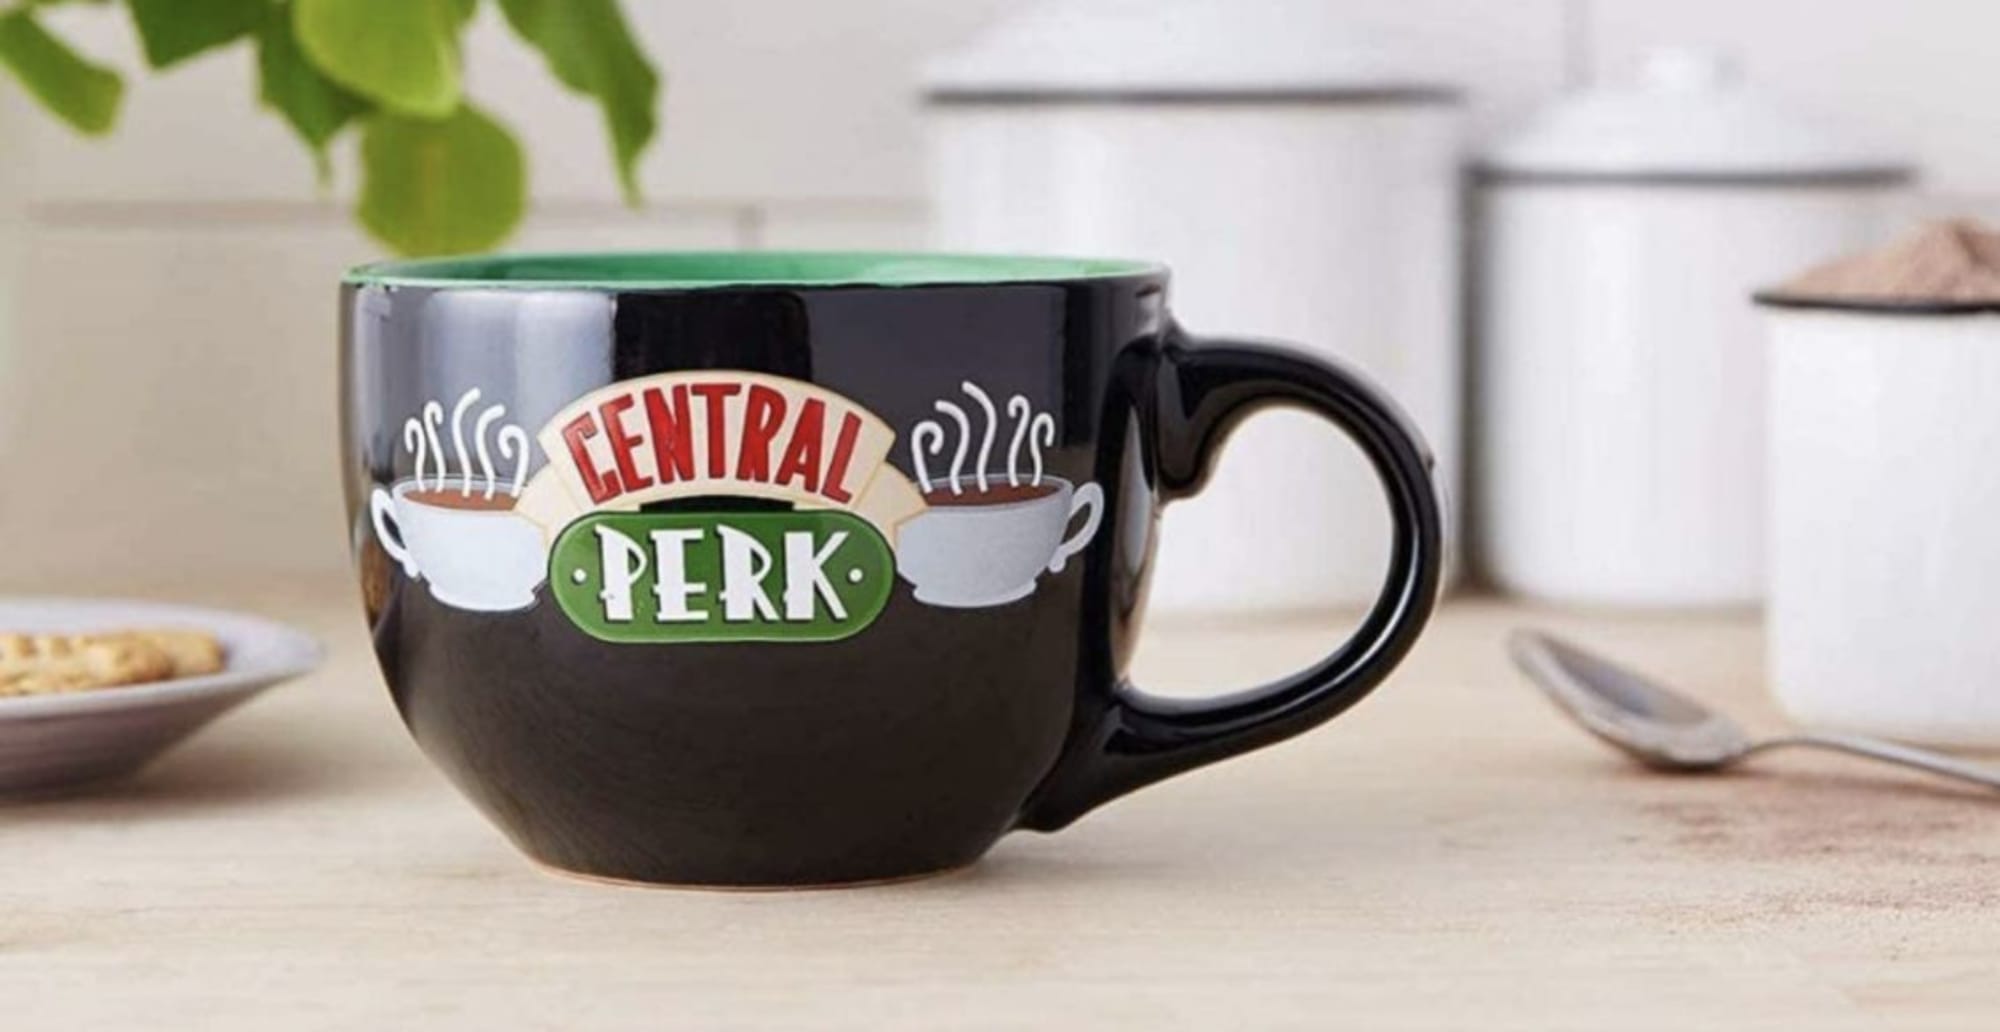 Friends Central Perk Cookbook and Apron Gift Set